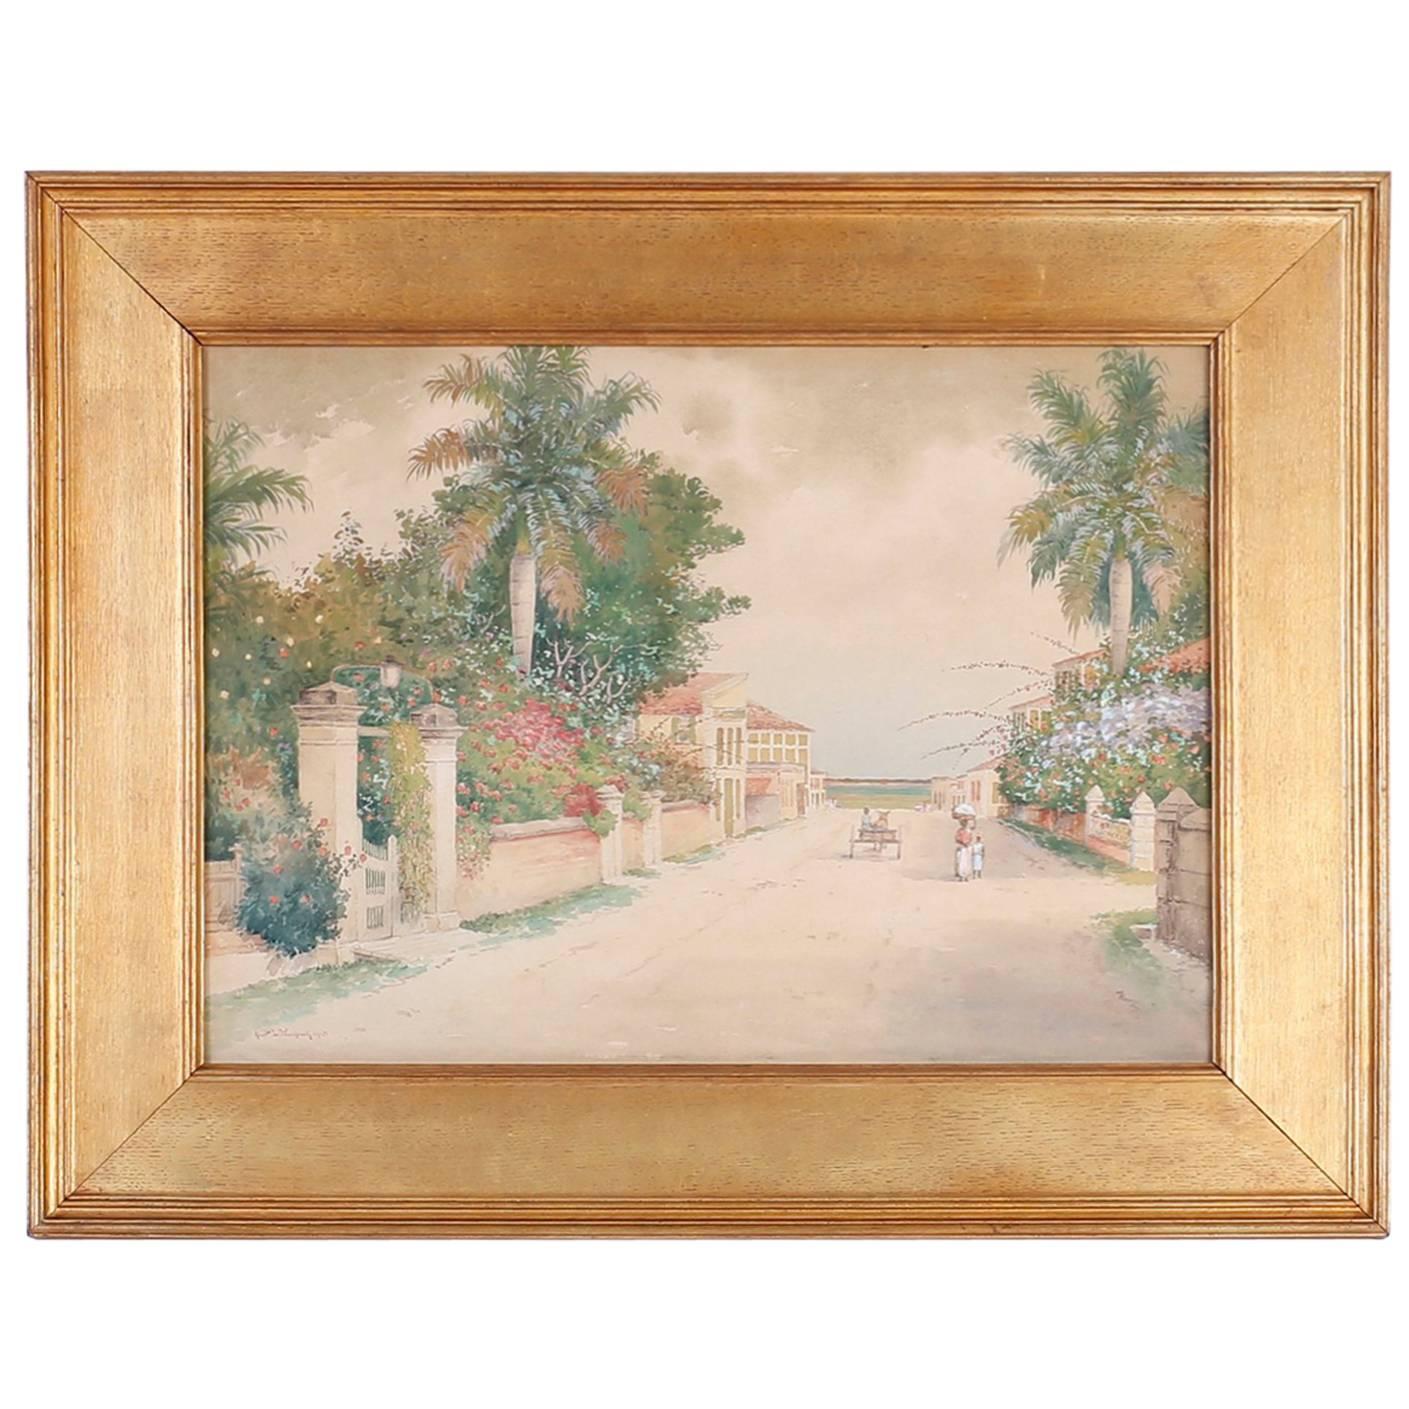 Watercolor of a Tropical Street Scene